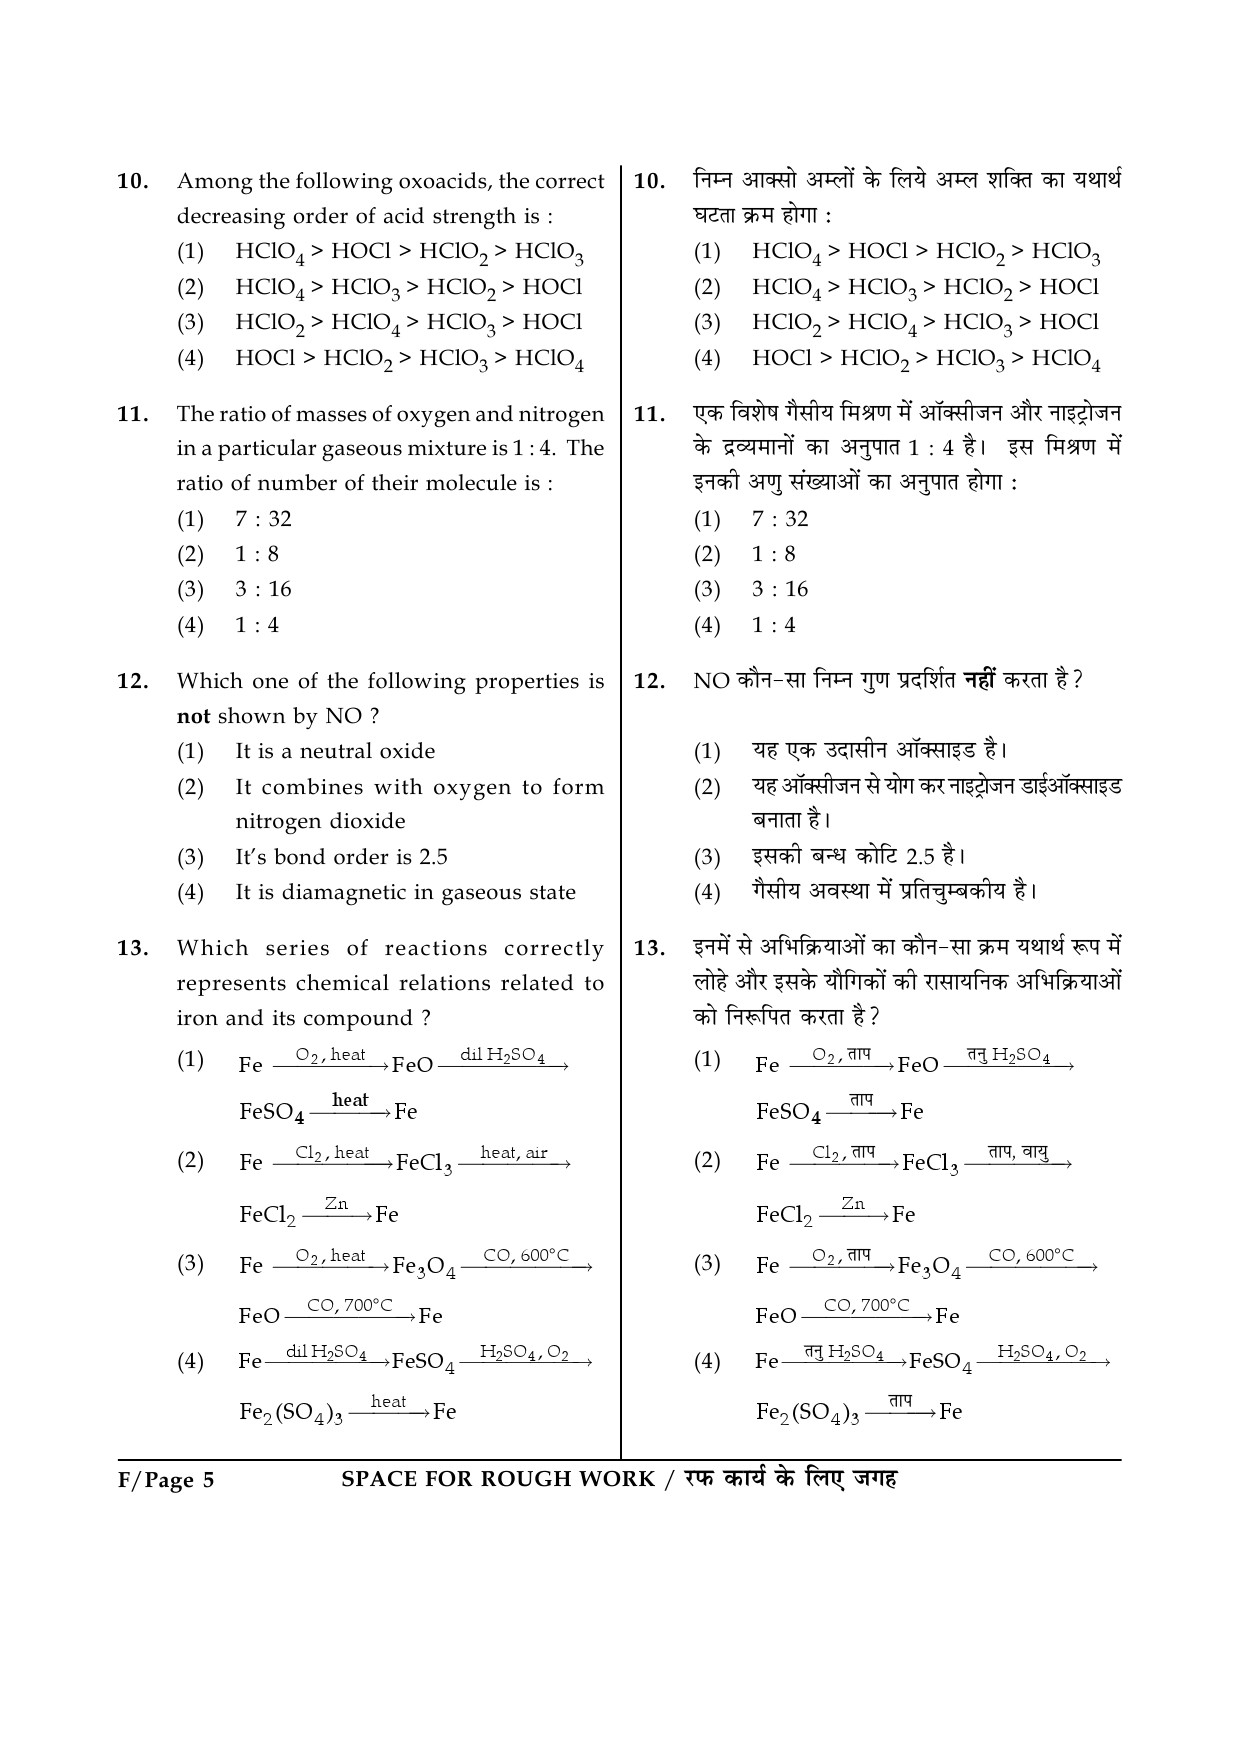 JEE Main Exam Question Paper 2014 Booklet F 5